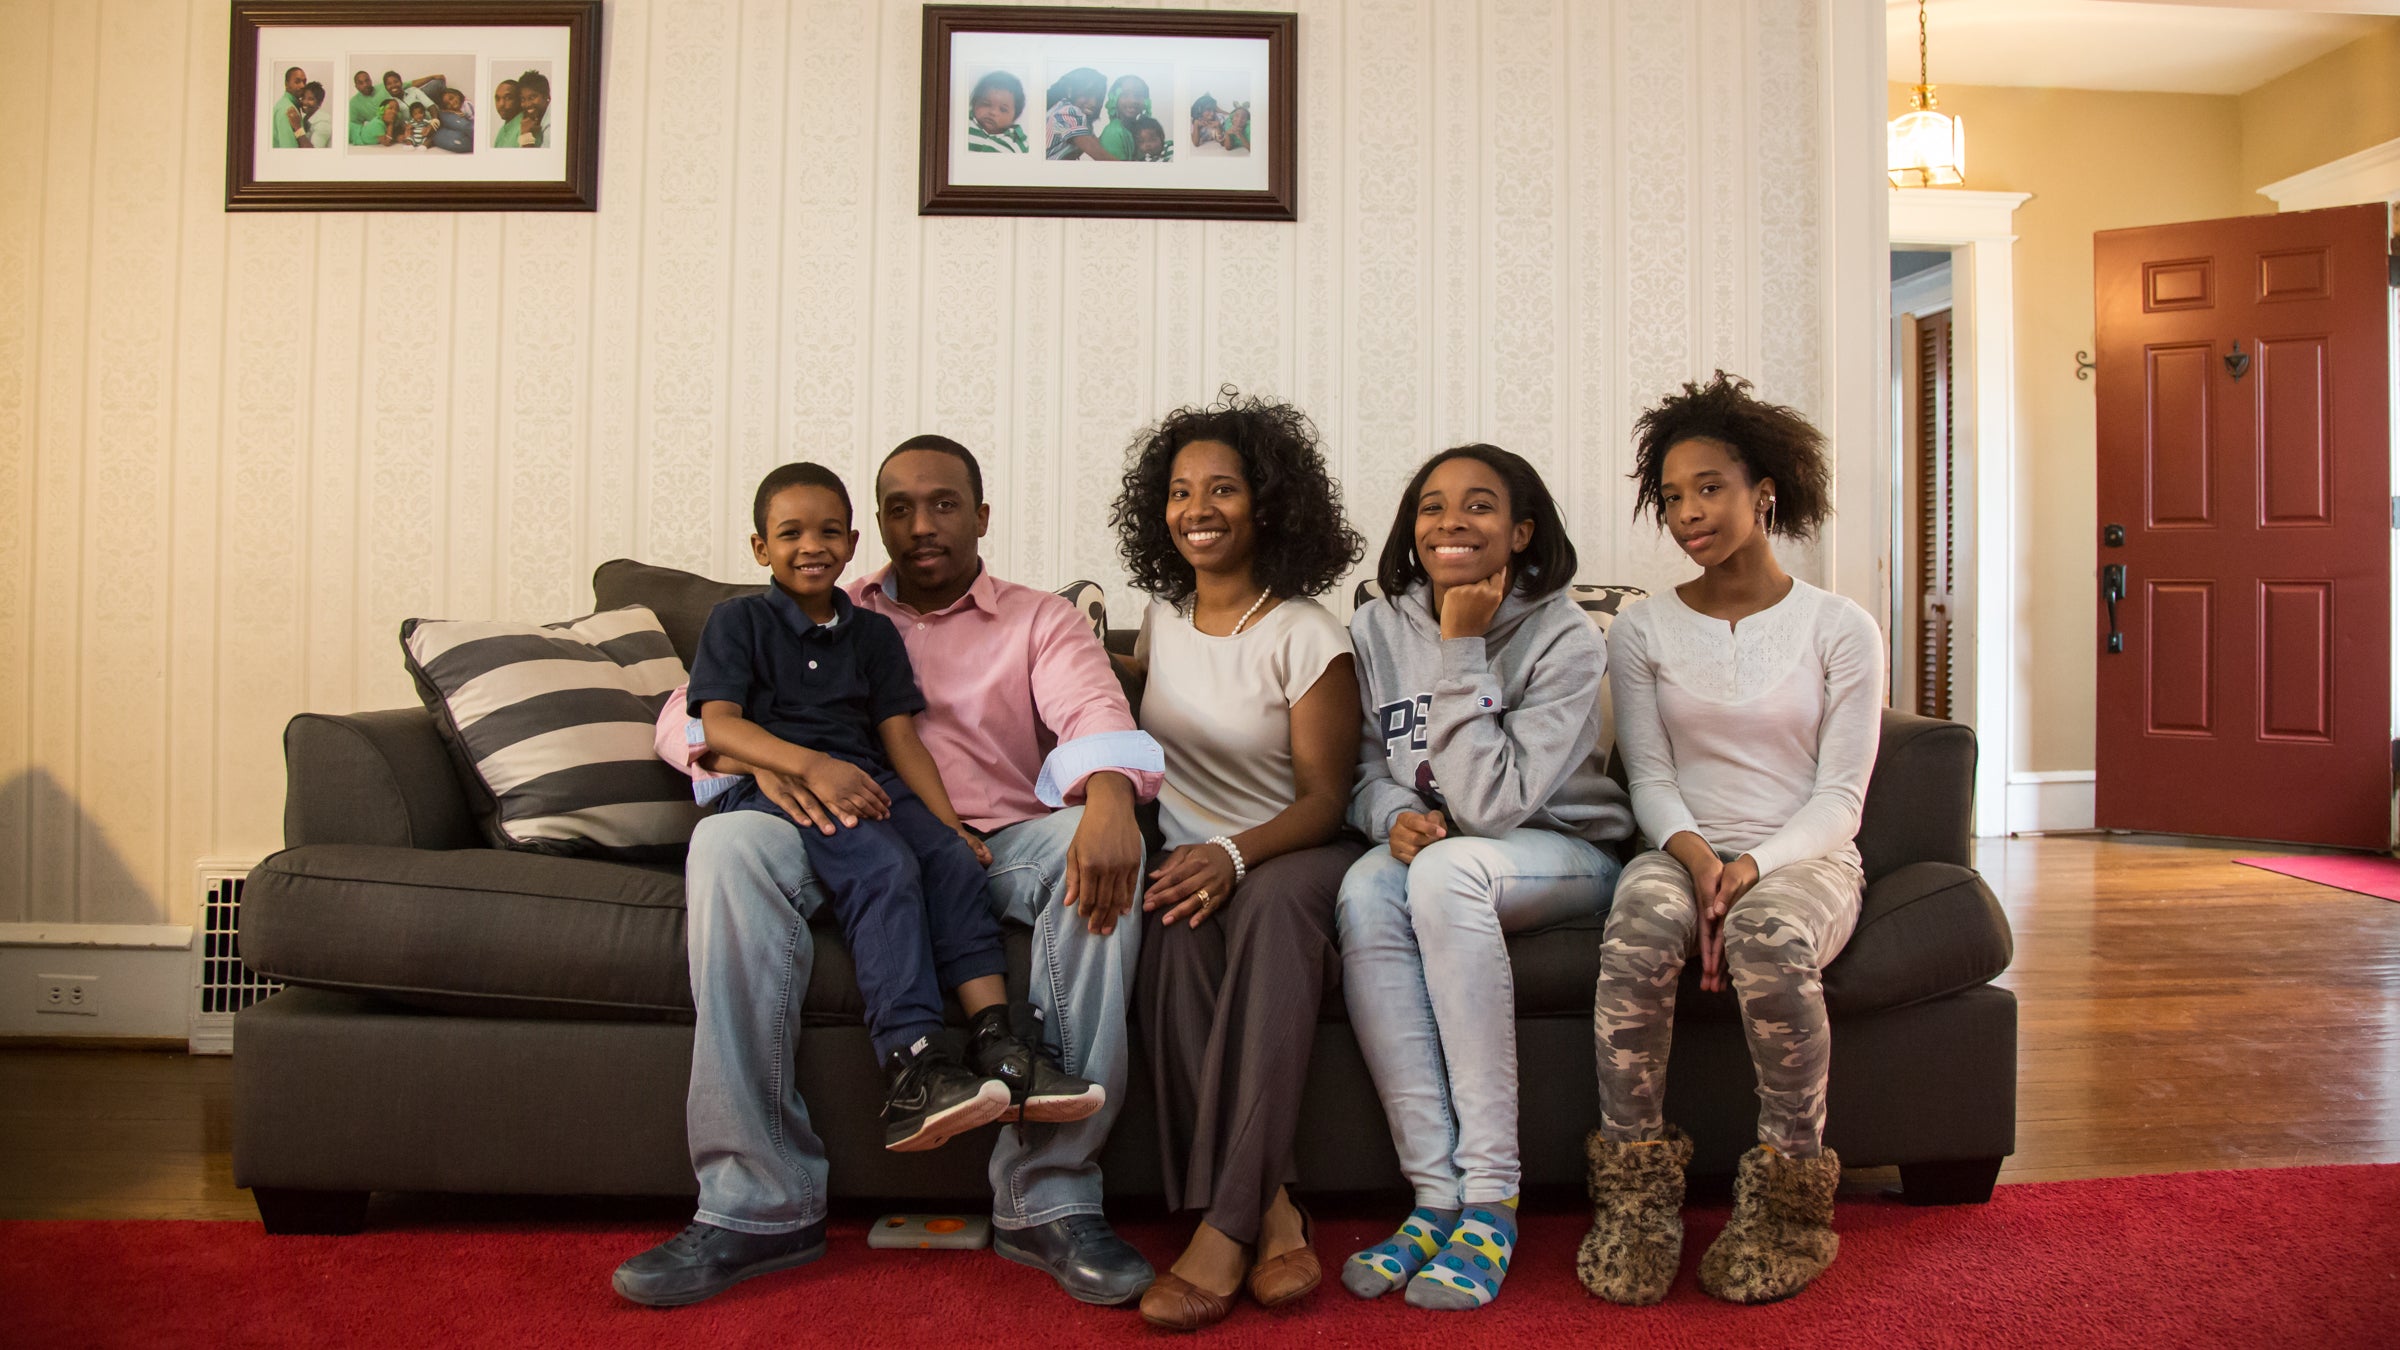 The Miller family sits in the living room of their Landsdowne home in 2016. (Emily Cohen for WHYY)